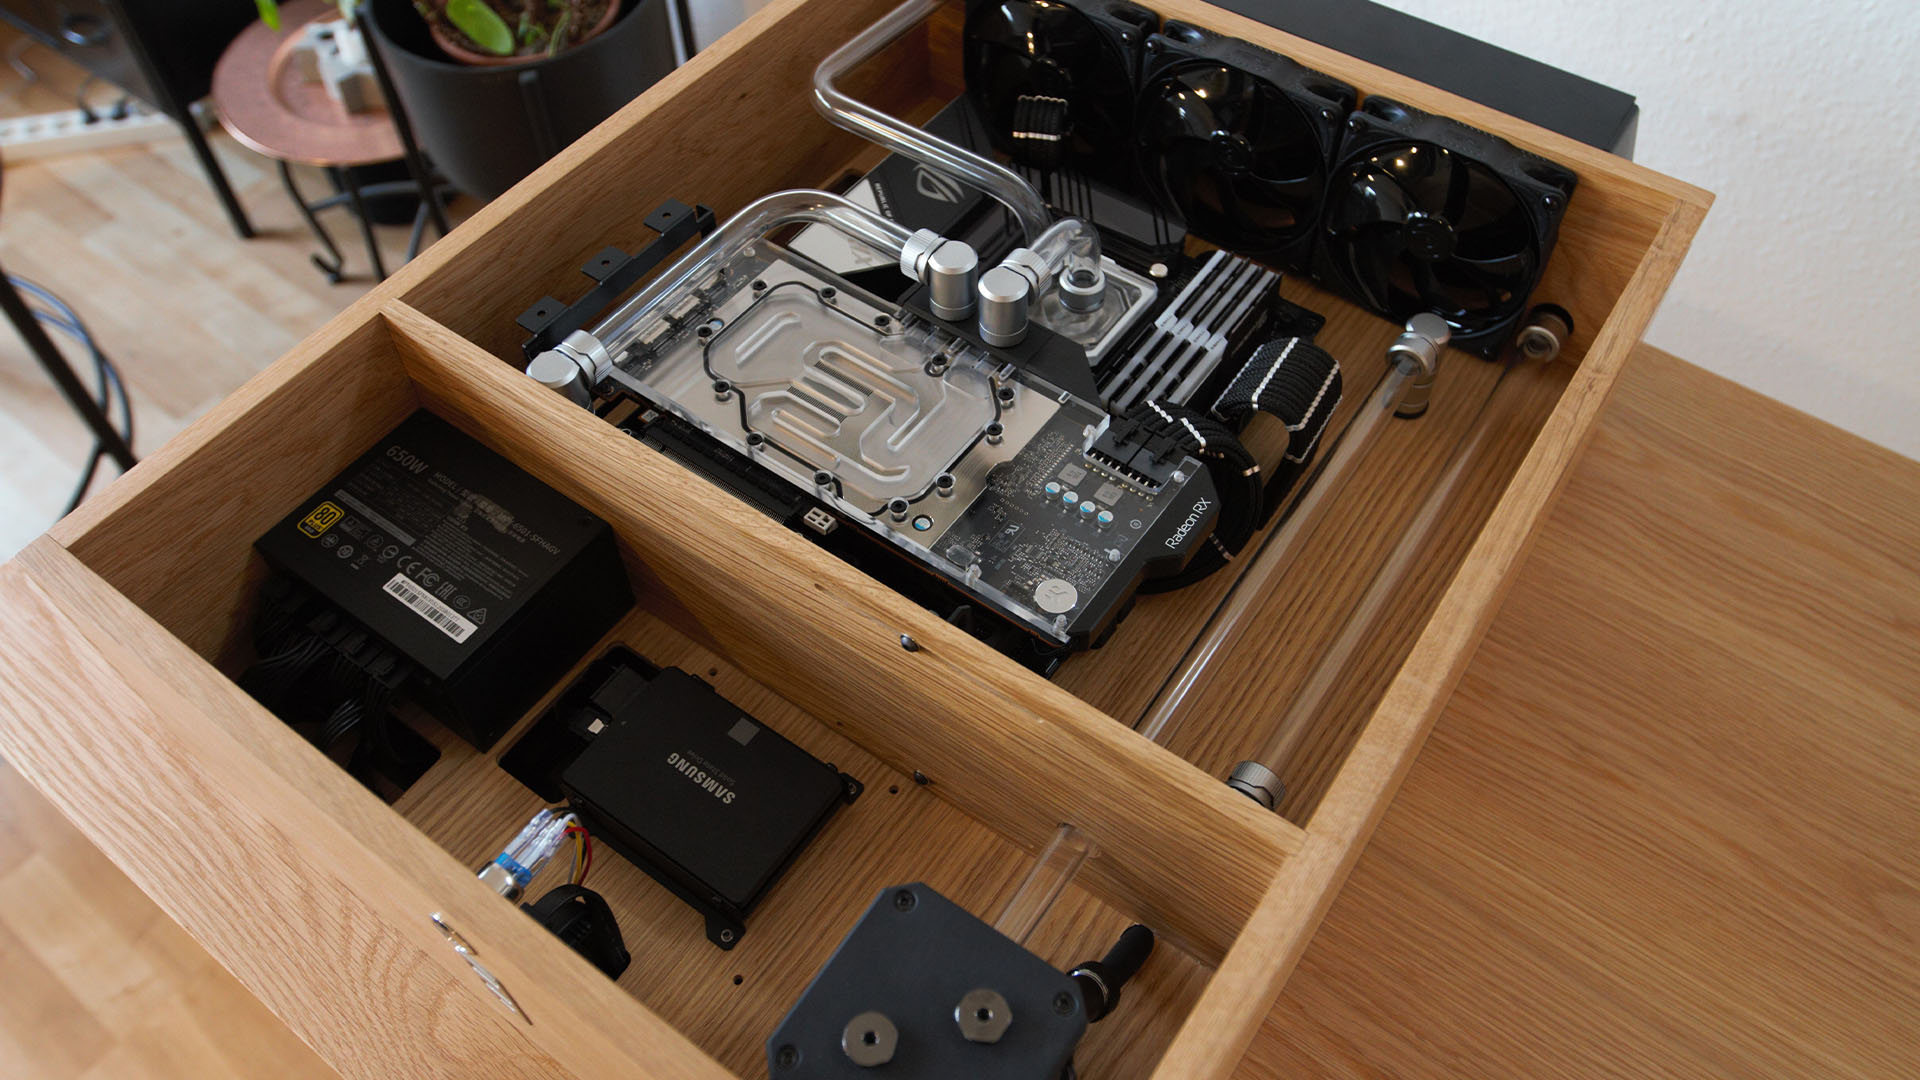 Wood water cooled desk PC: Components in the drawer